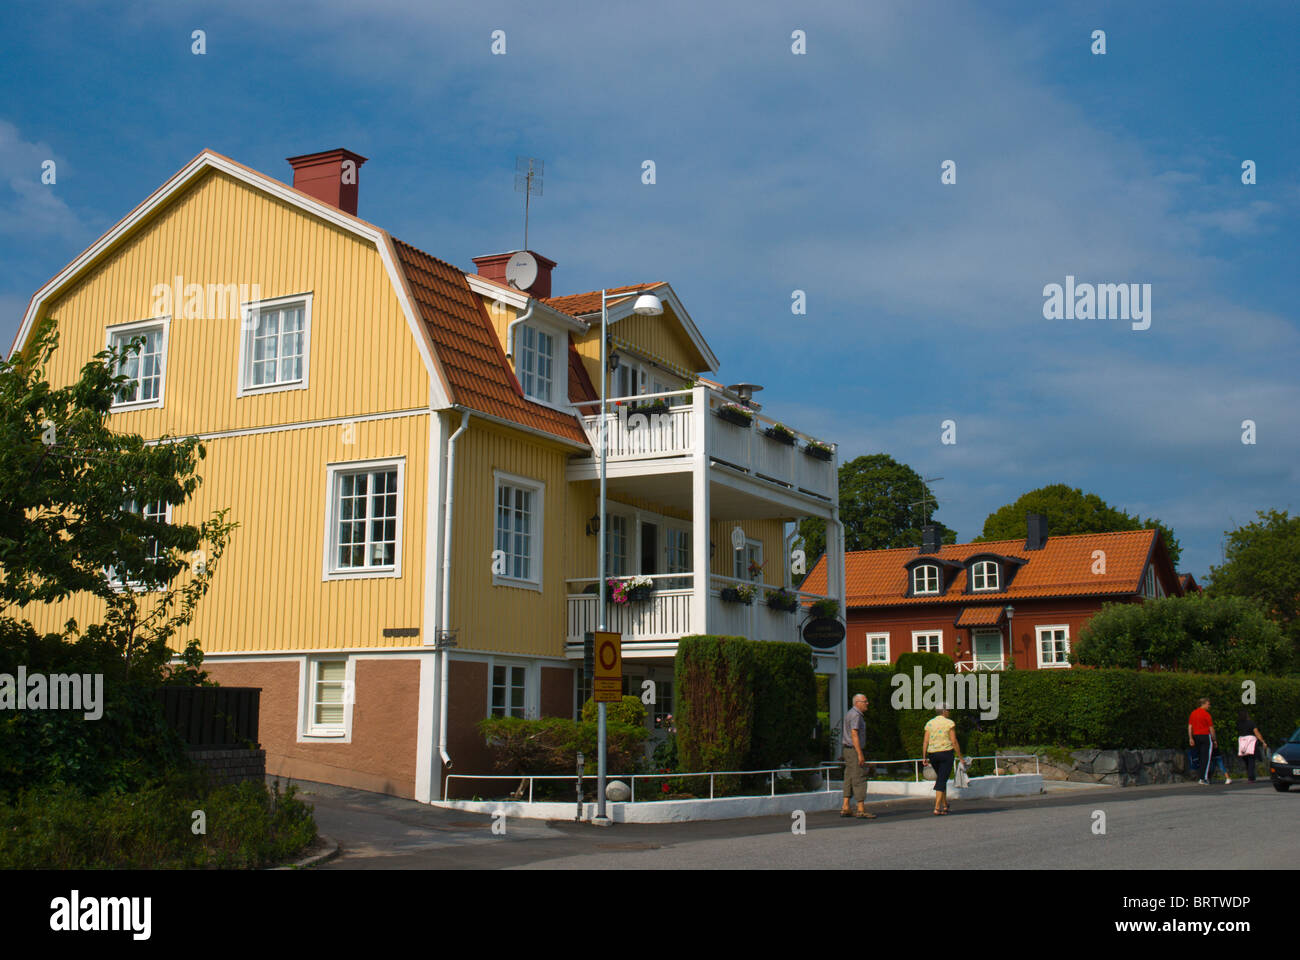 Sigtuna the oldest town in Sweden in Greater Stockholm area Stock Photo